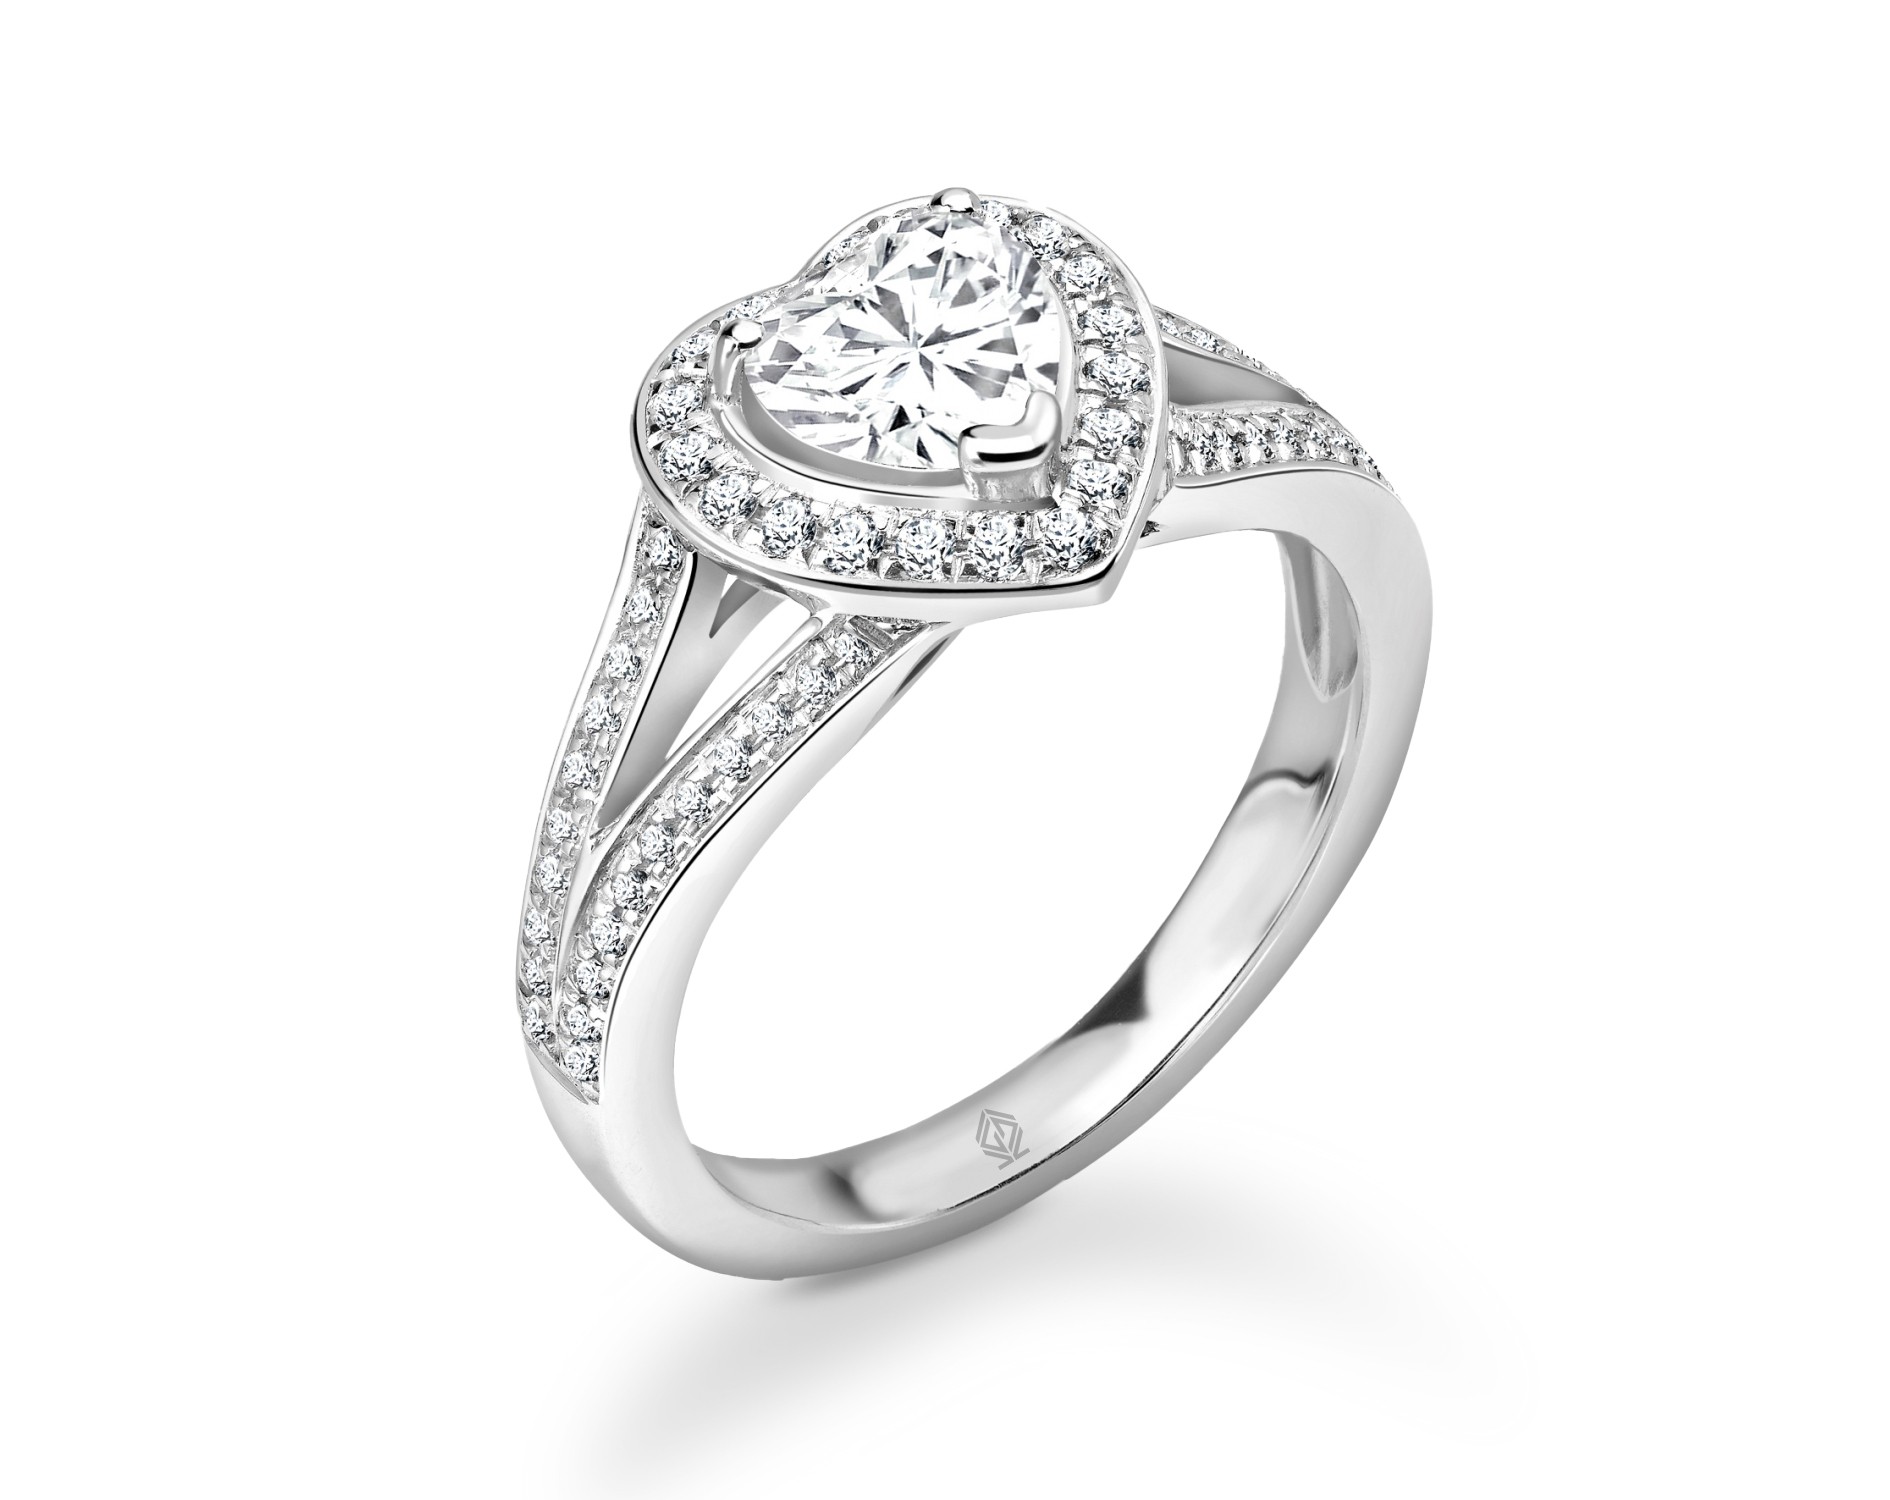 18K WHITE GOLD HEART CUT HALO DIAMOND ENGAGEMENT RING WITH SIDE STONES IN SPLIT SHANK CHANNEL SET